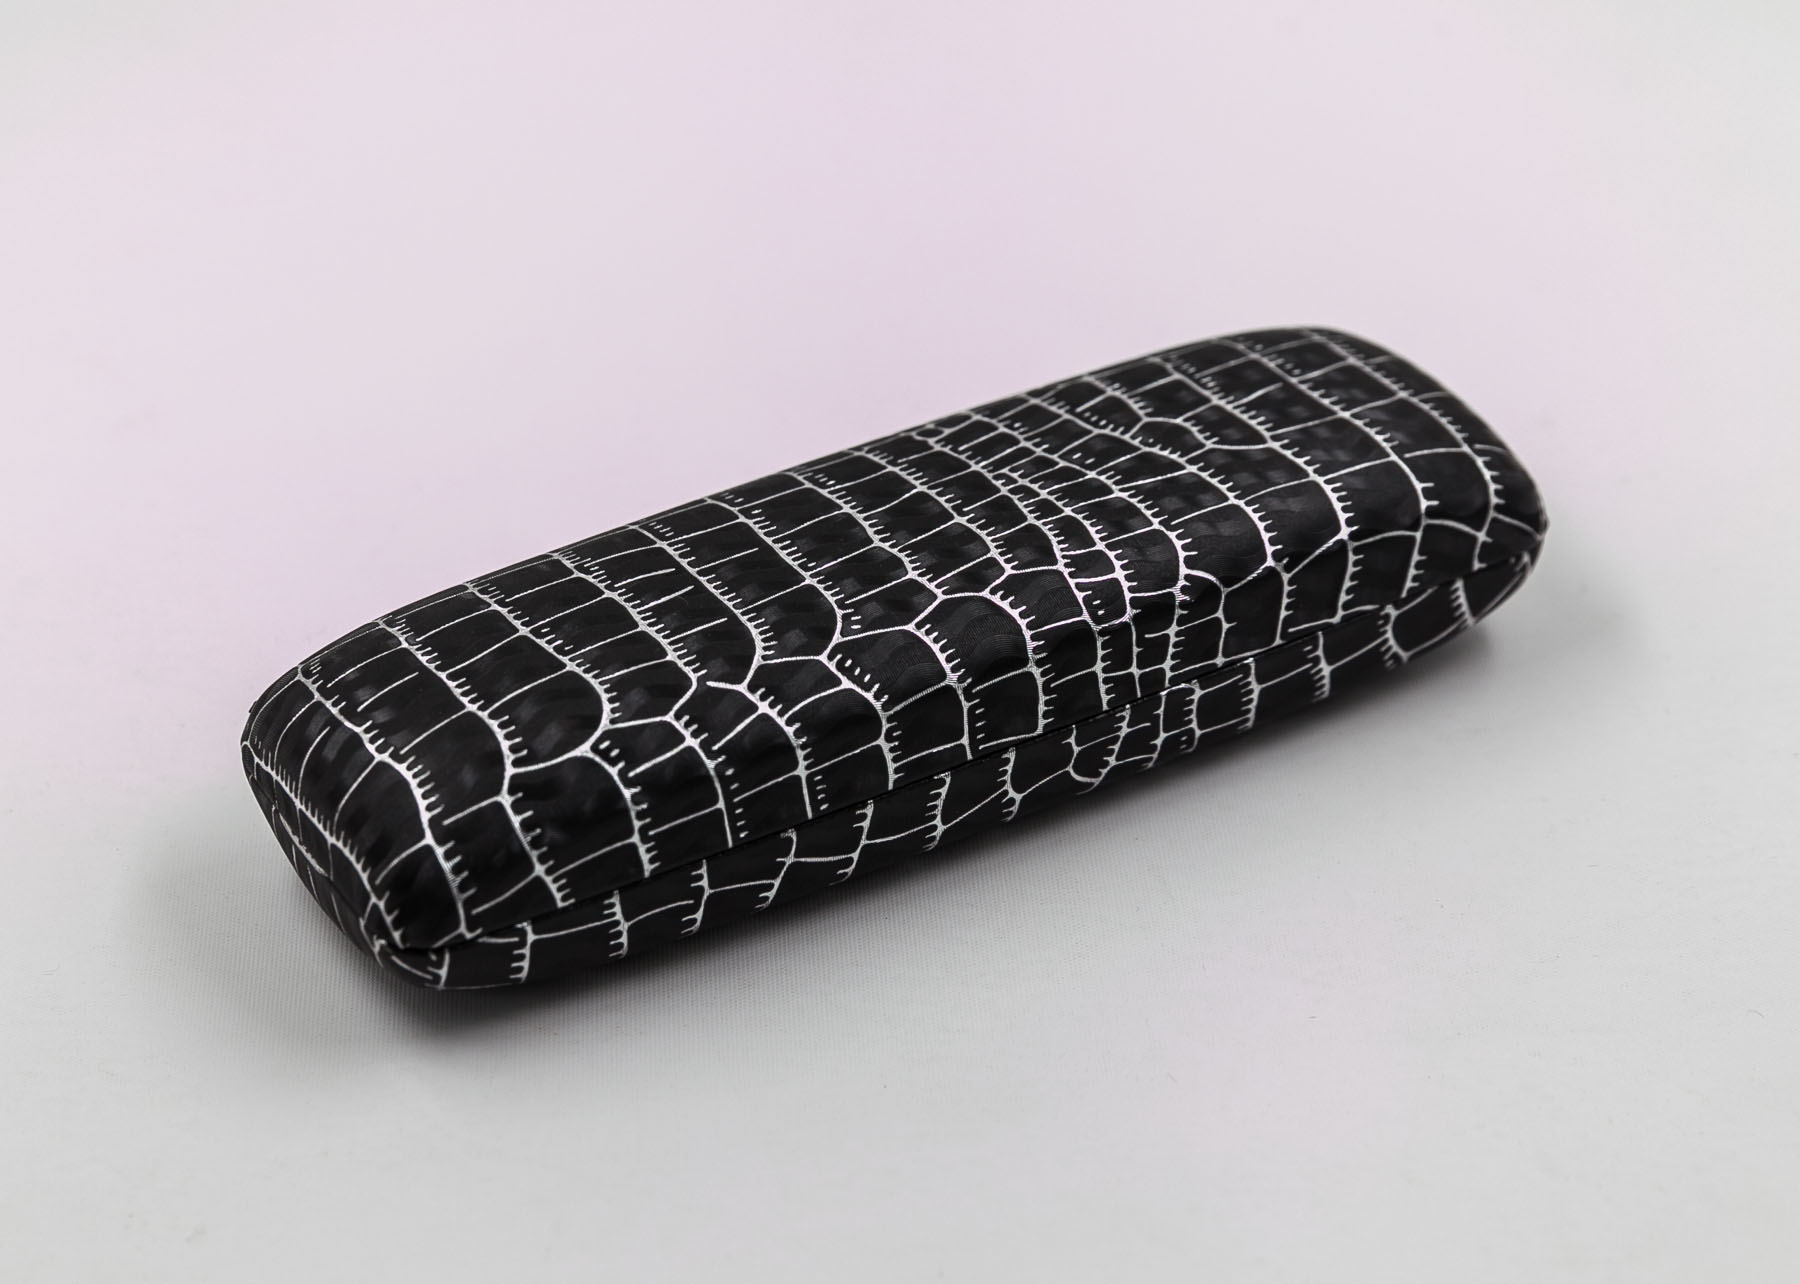 2021 Glasscase An eyeglass case with an irregular pattern printed on sunglasses,